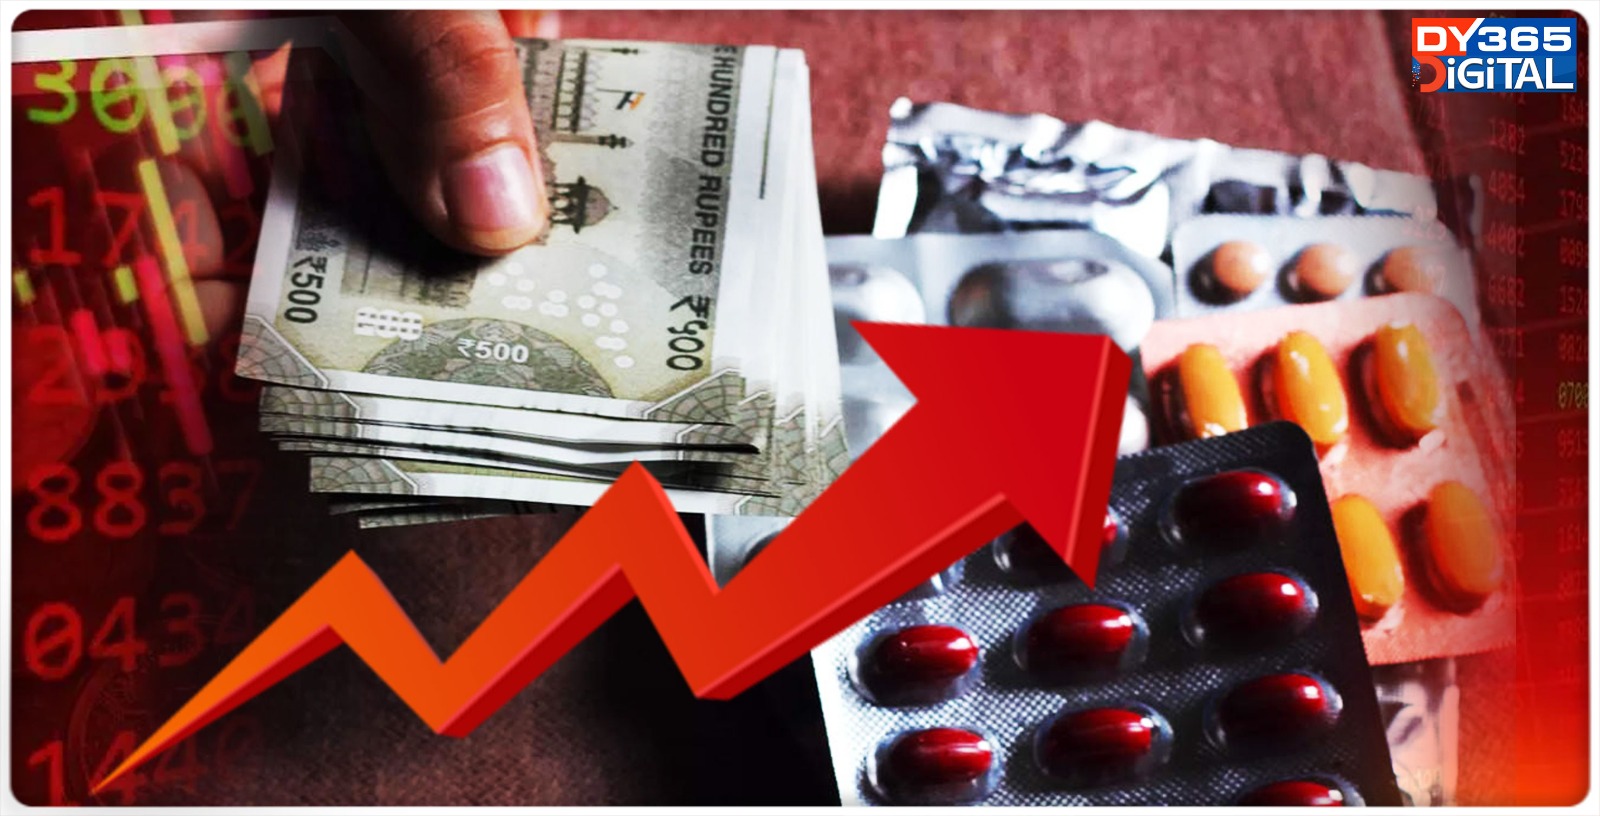 prices-of-800-essential-medicines-to-get-costly-from-april-1